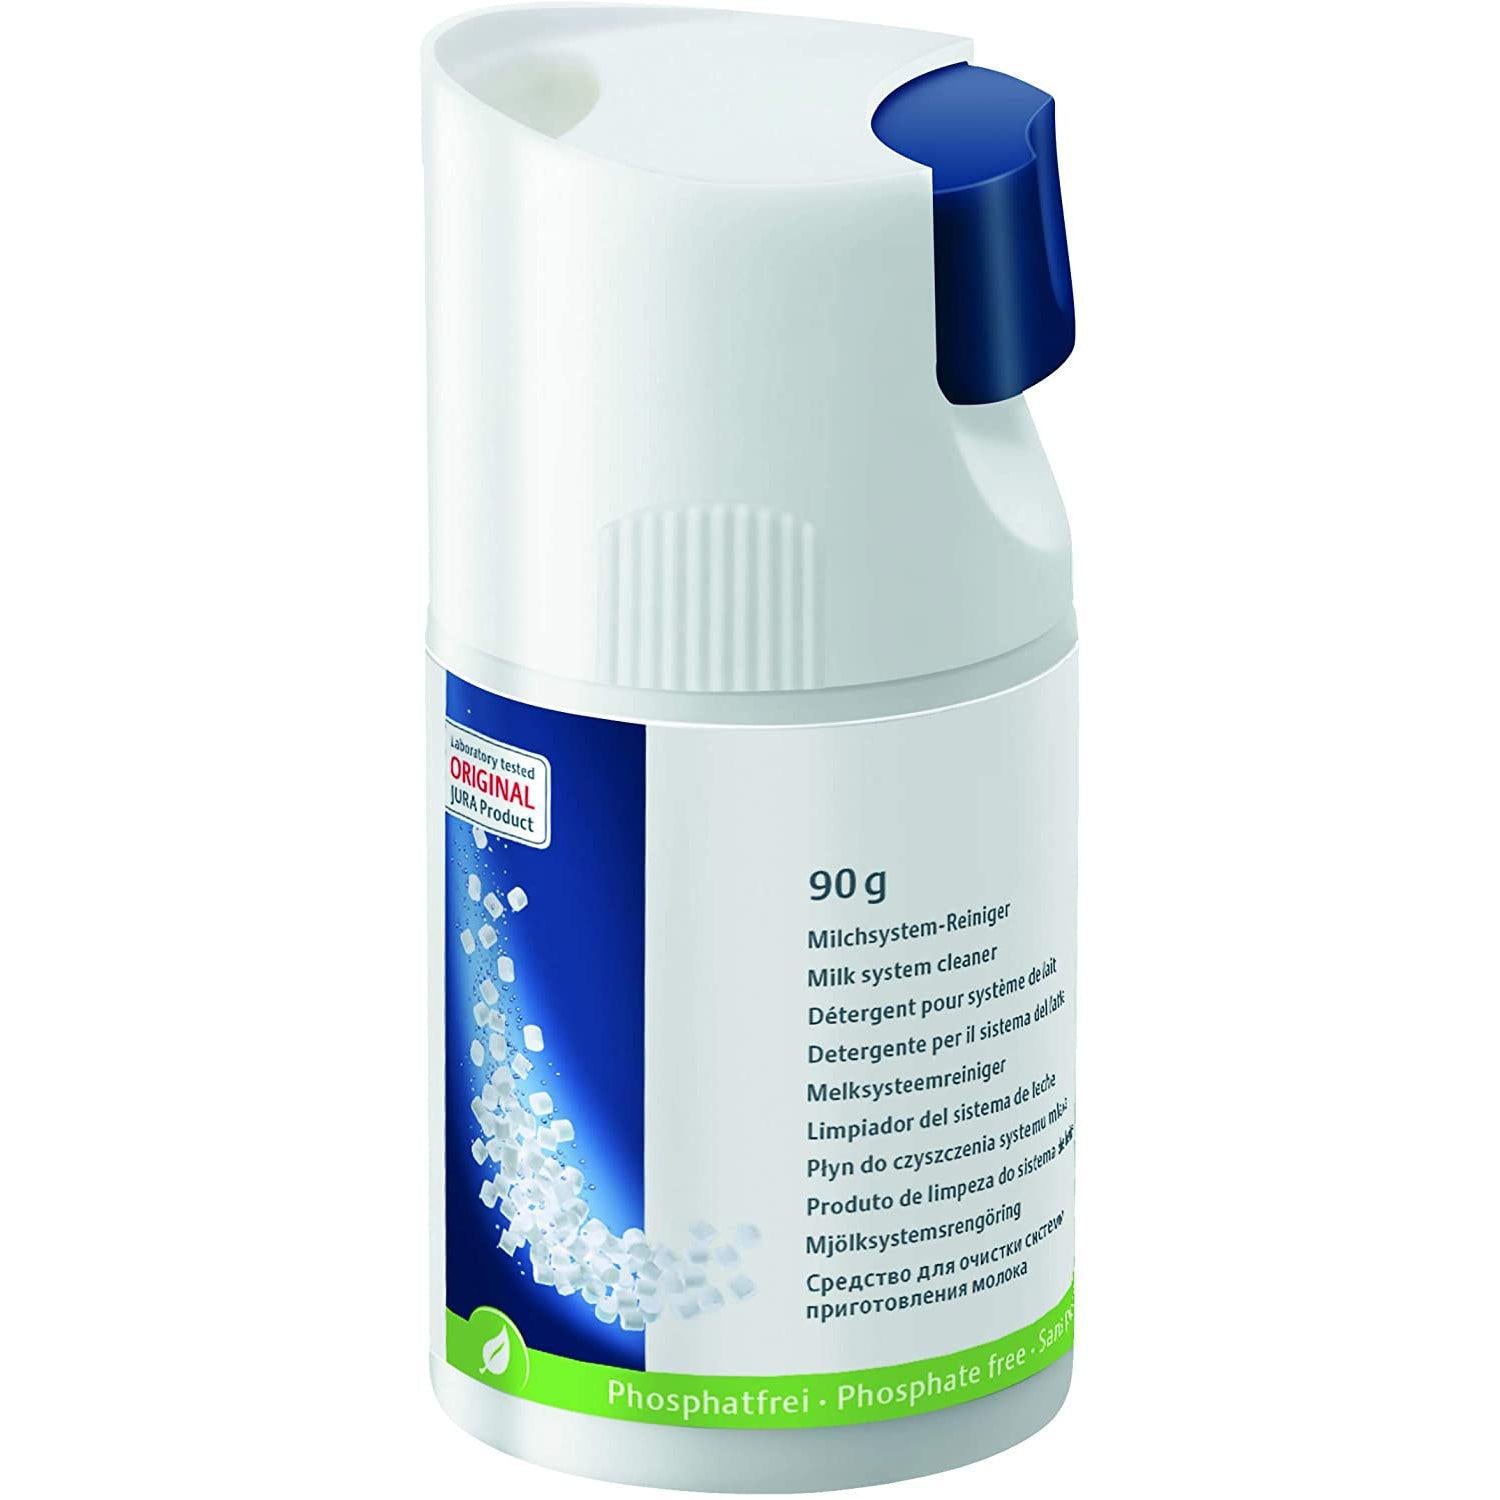 Jura 24158 Mini Tabs with Dosing System 90g Milk System Cleaner - Healthxpress.ie